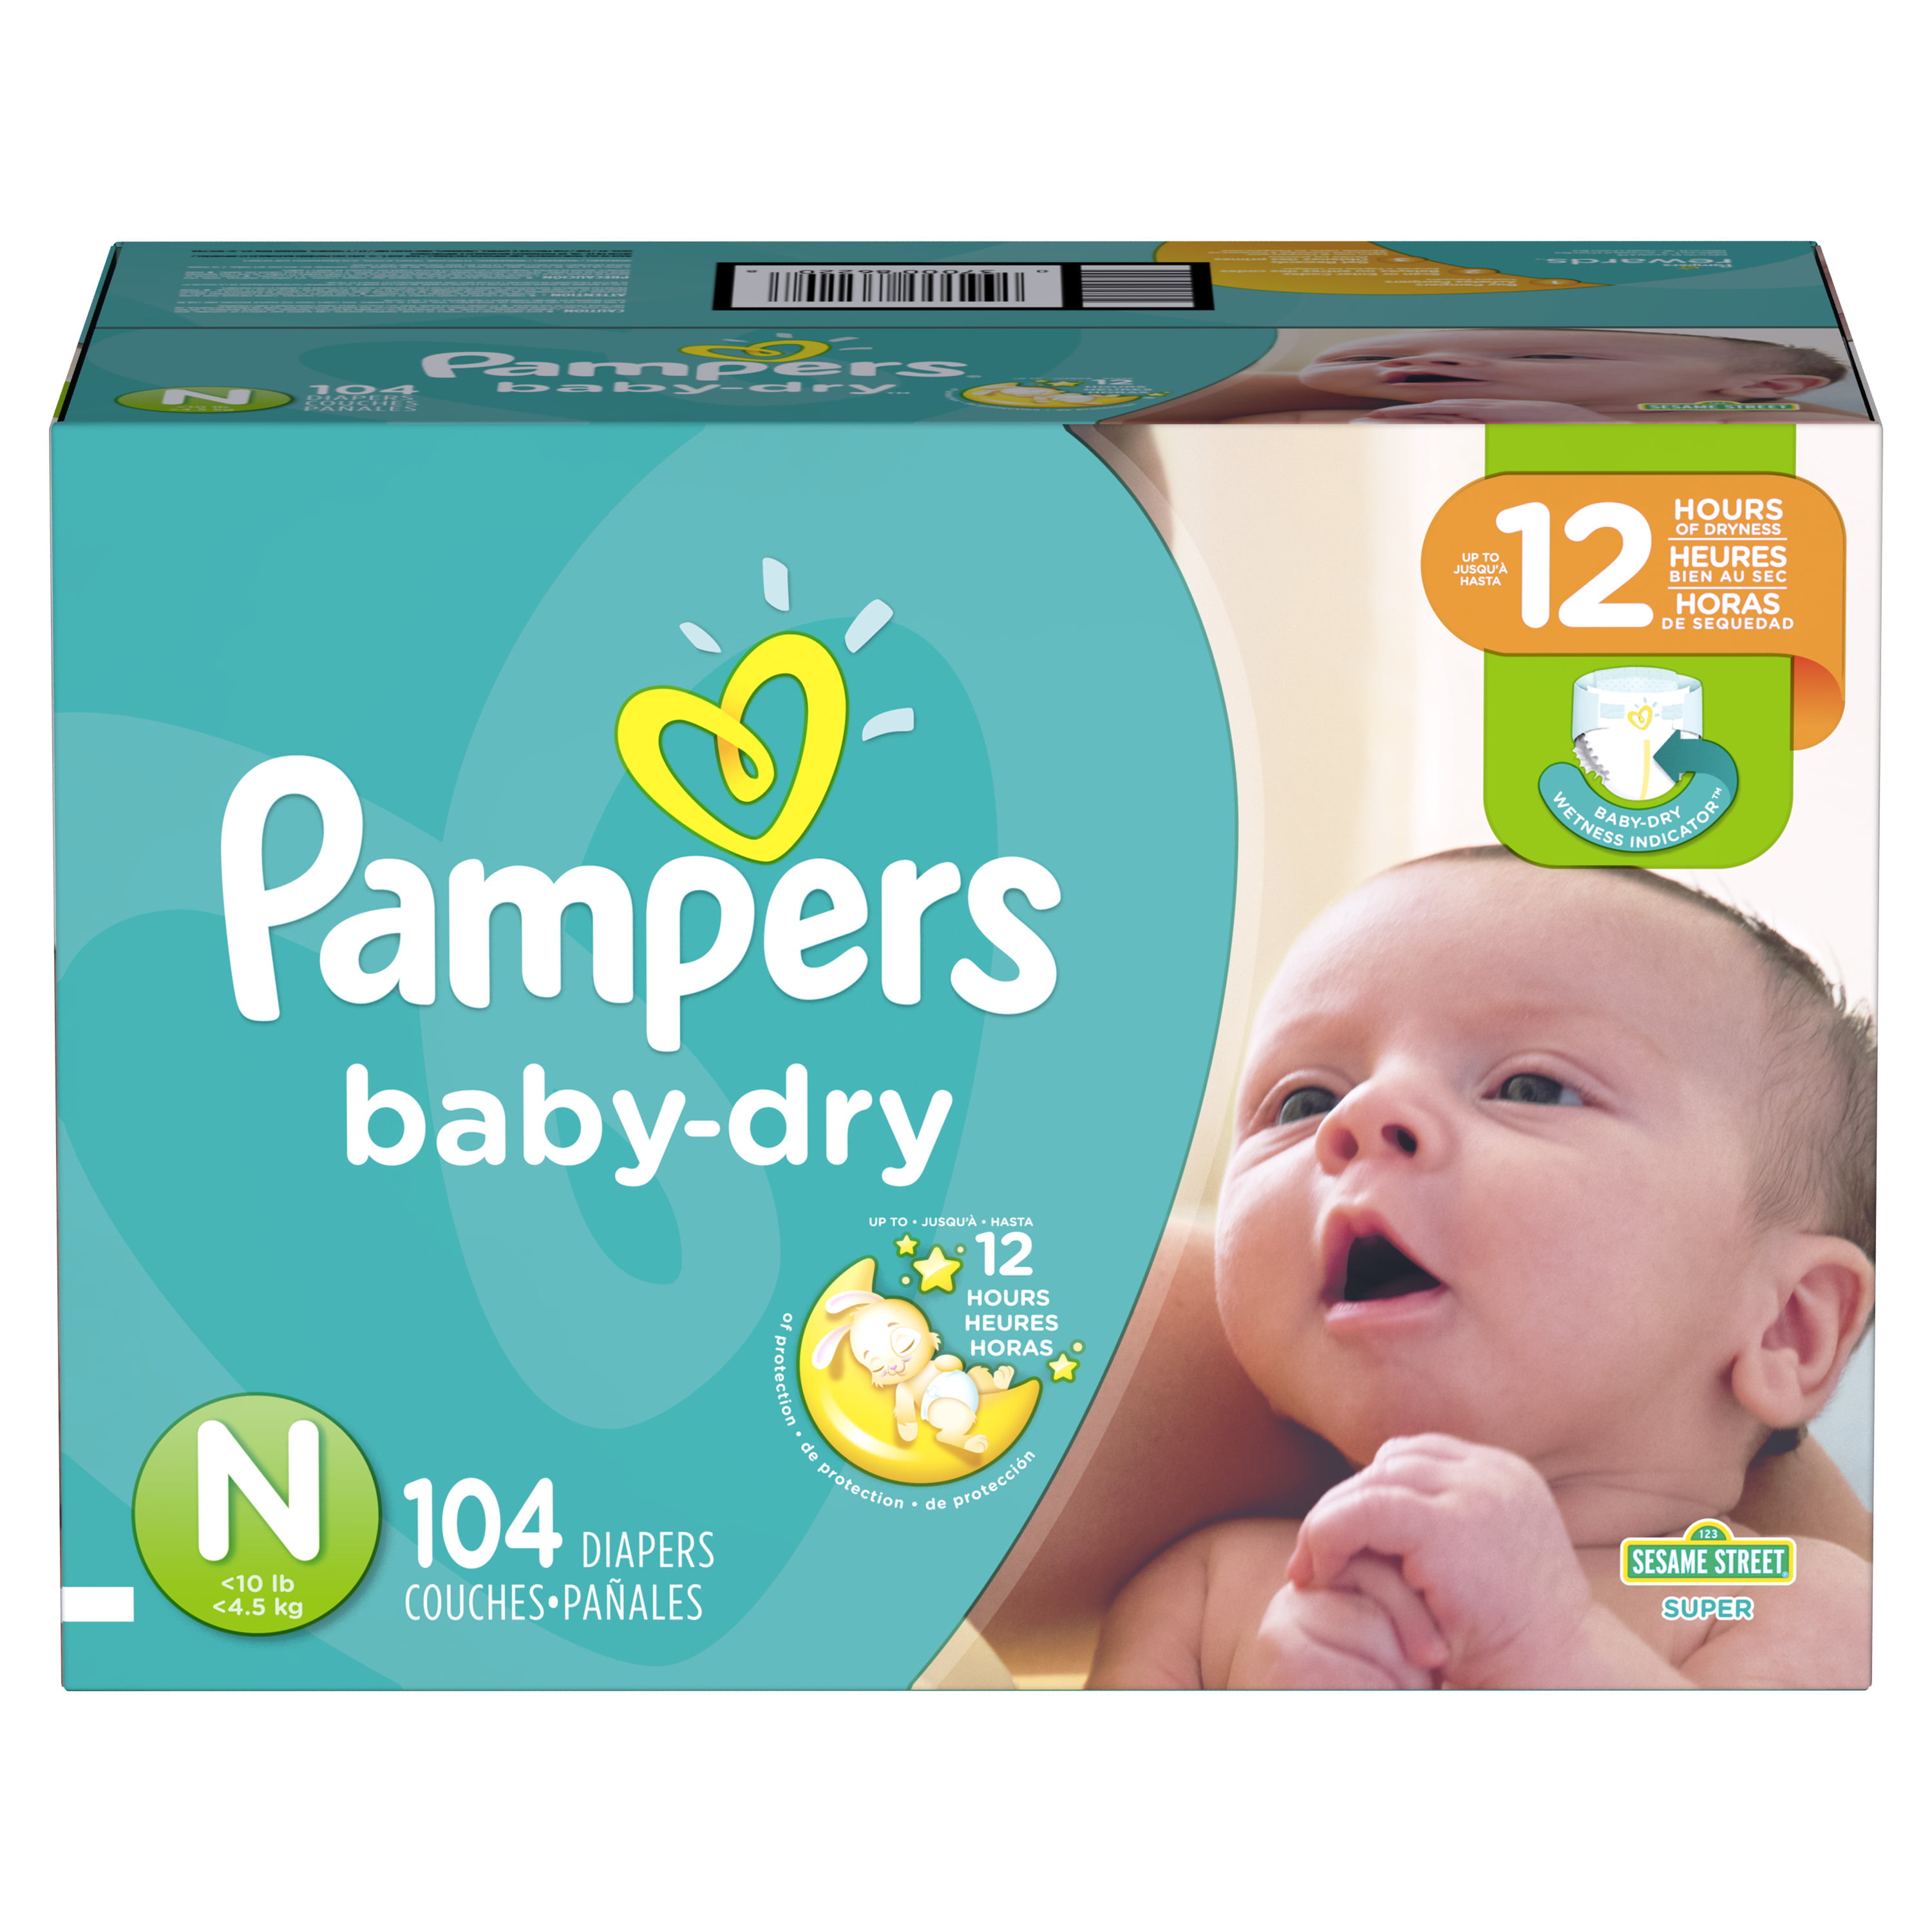 pampers diapers small size price